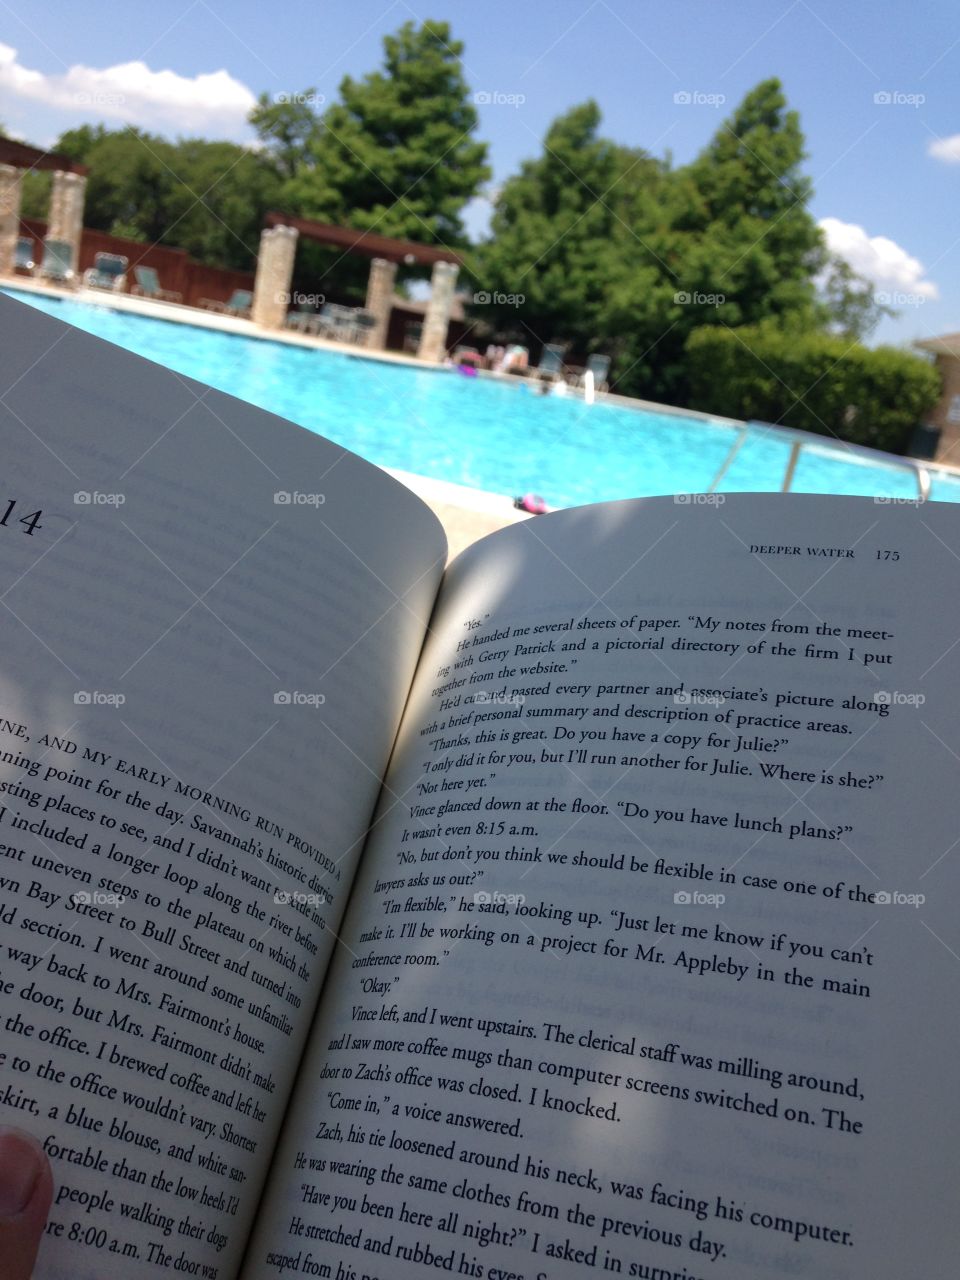 A little R & R. Reading a book by the pool